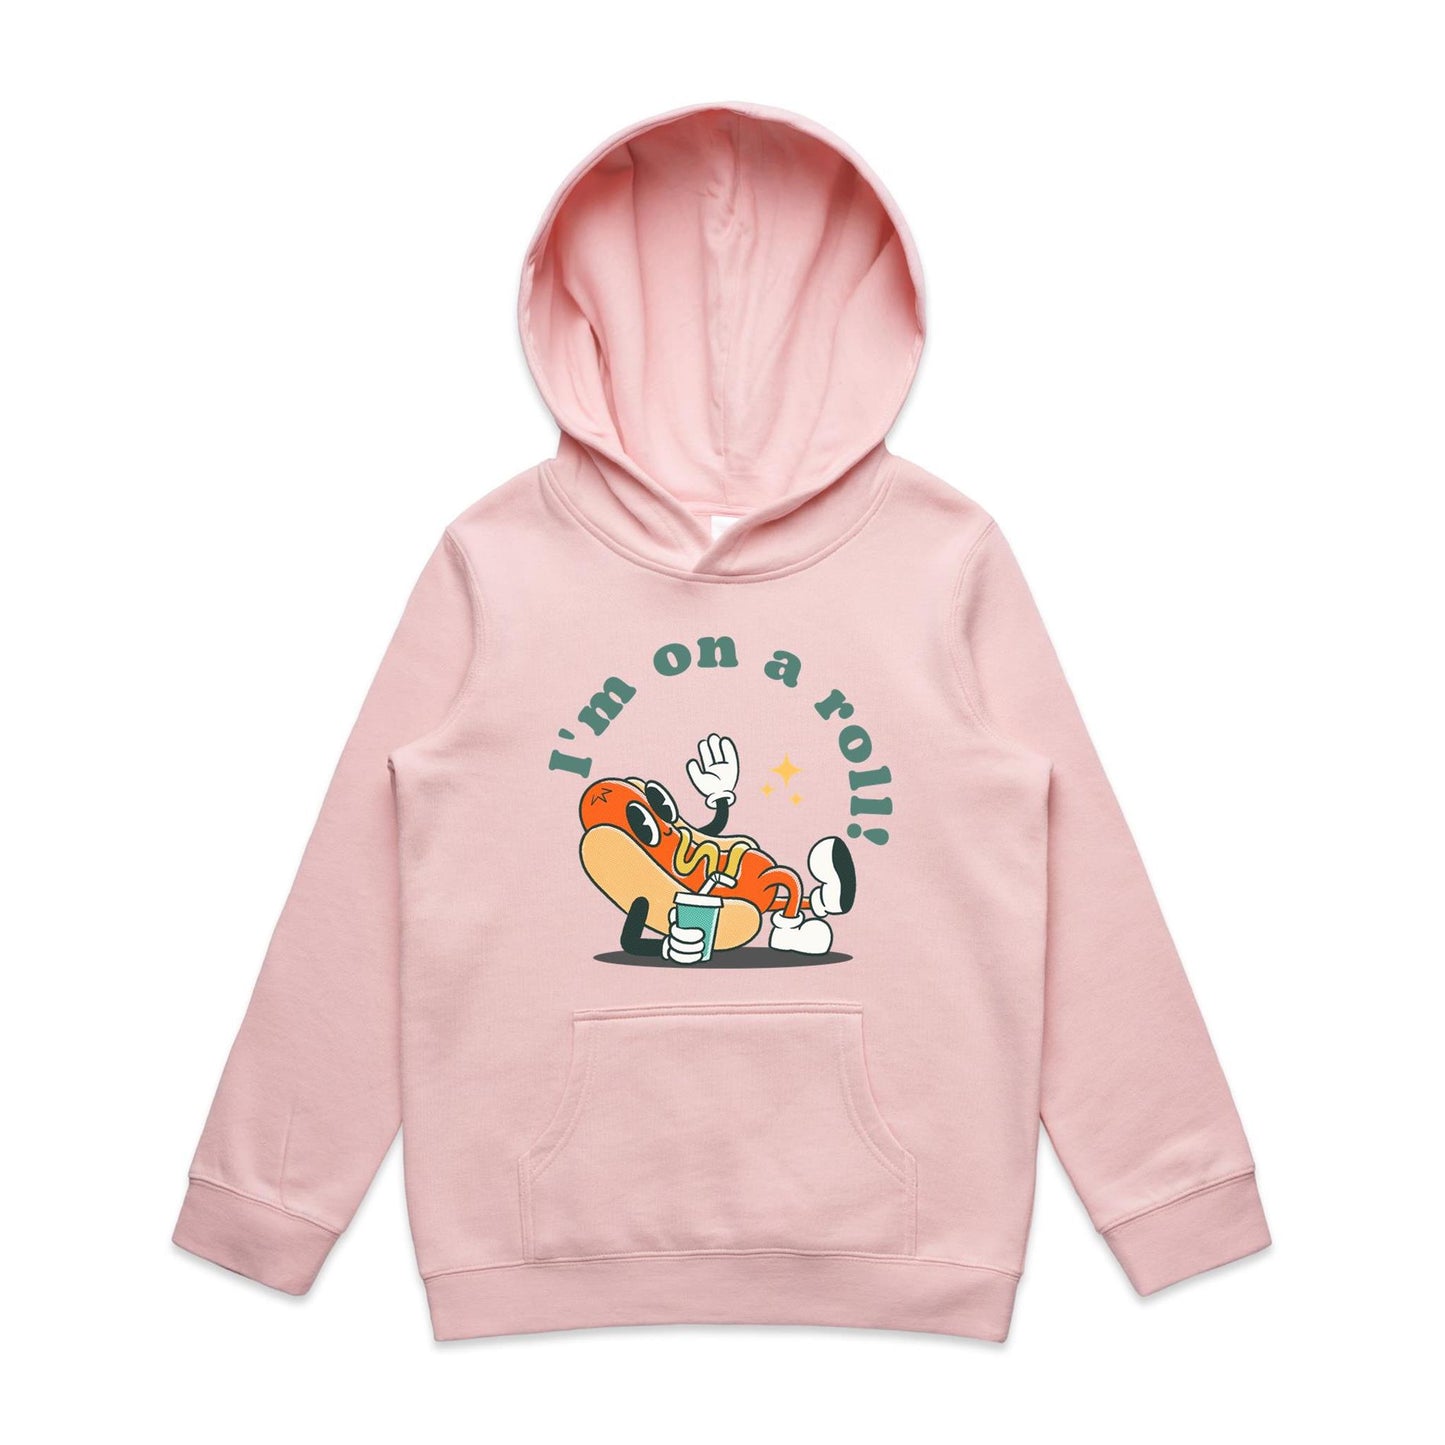 Hot Dog, I'm On A Roll - Youth Supply Hood Pink Kids Hoodie Food Retro